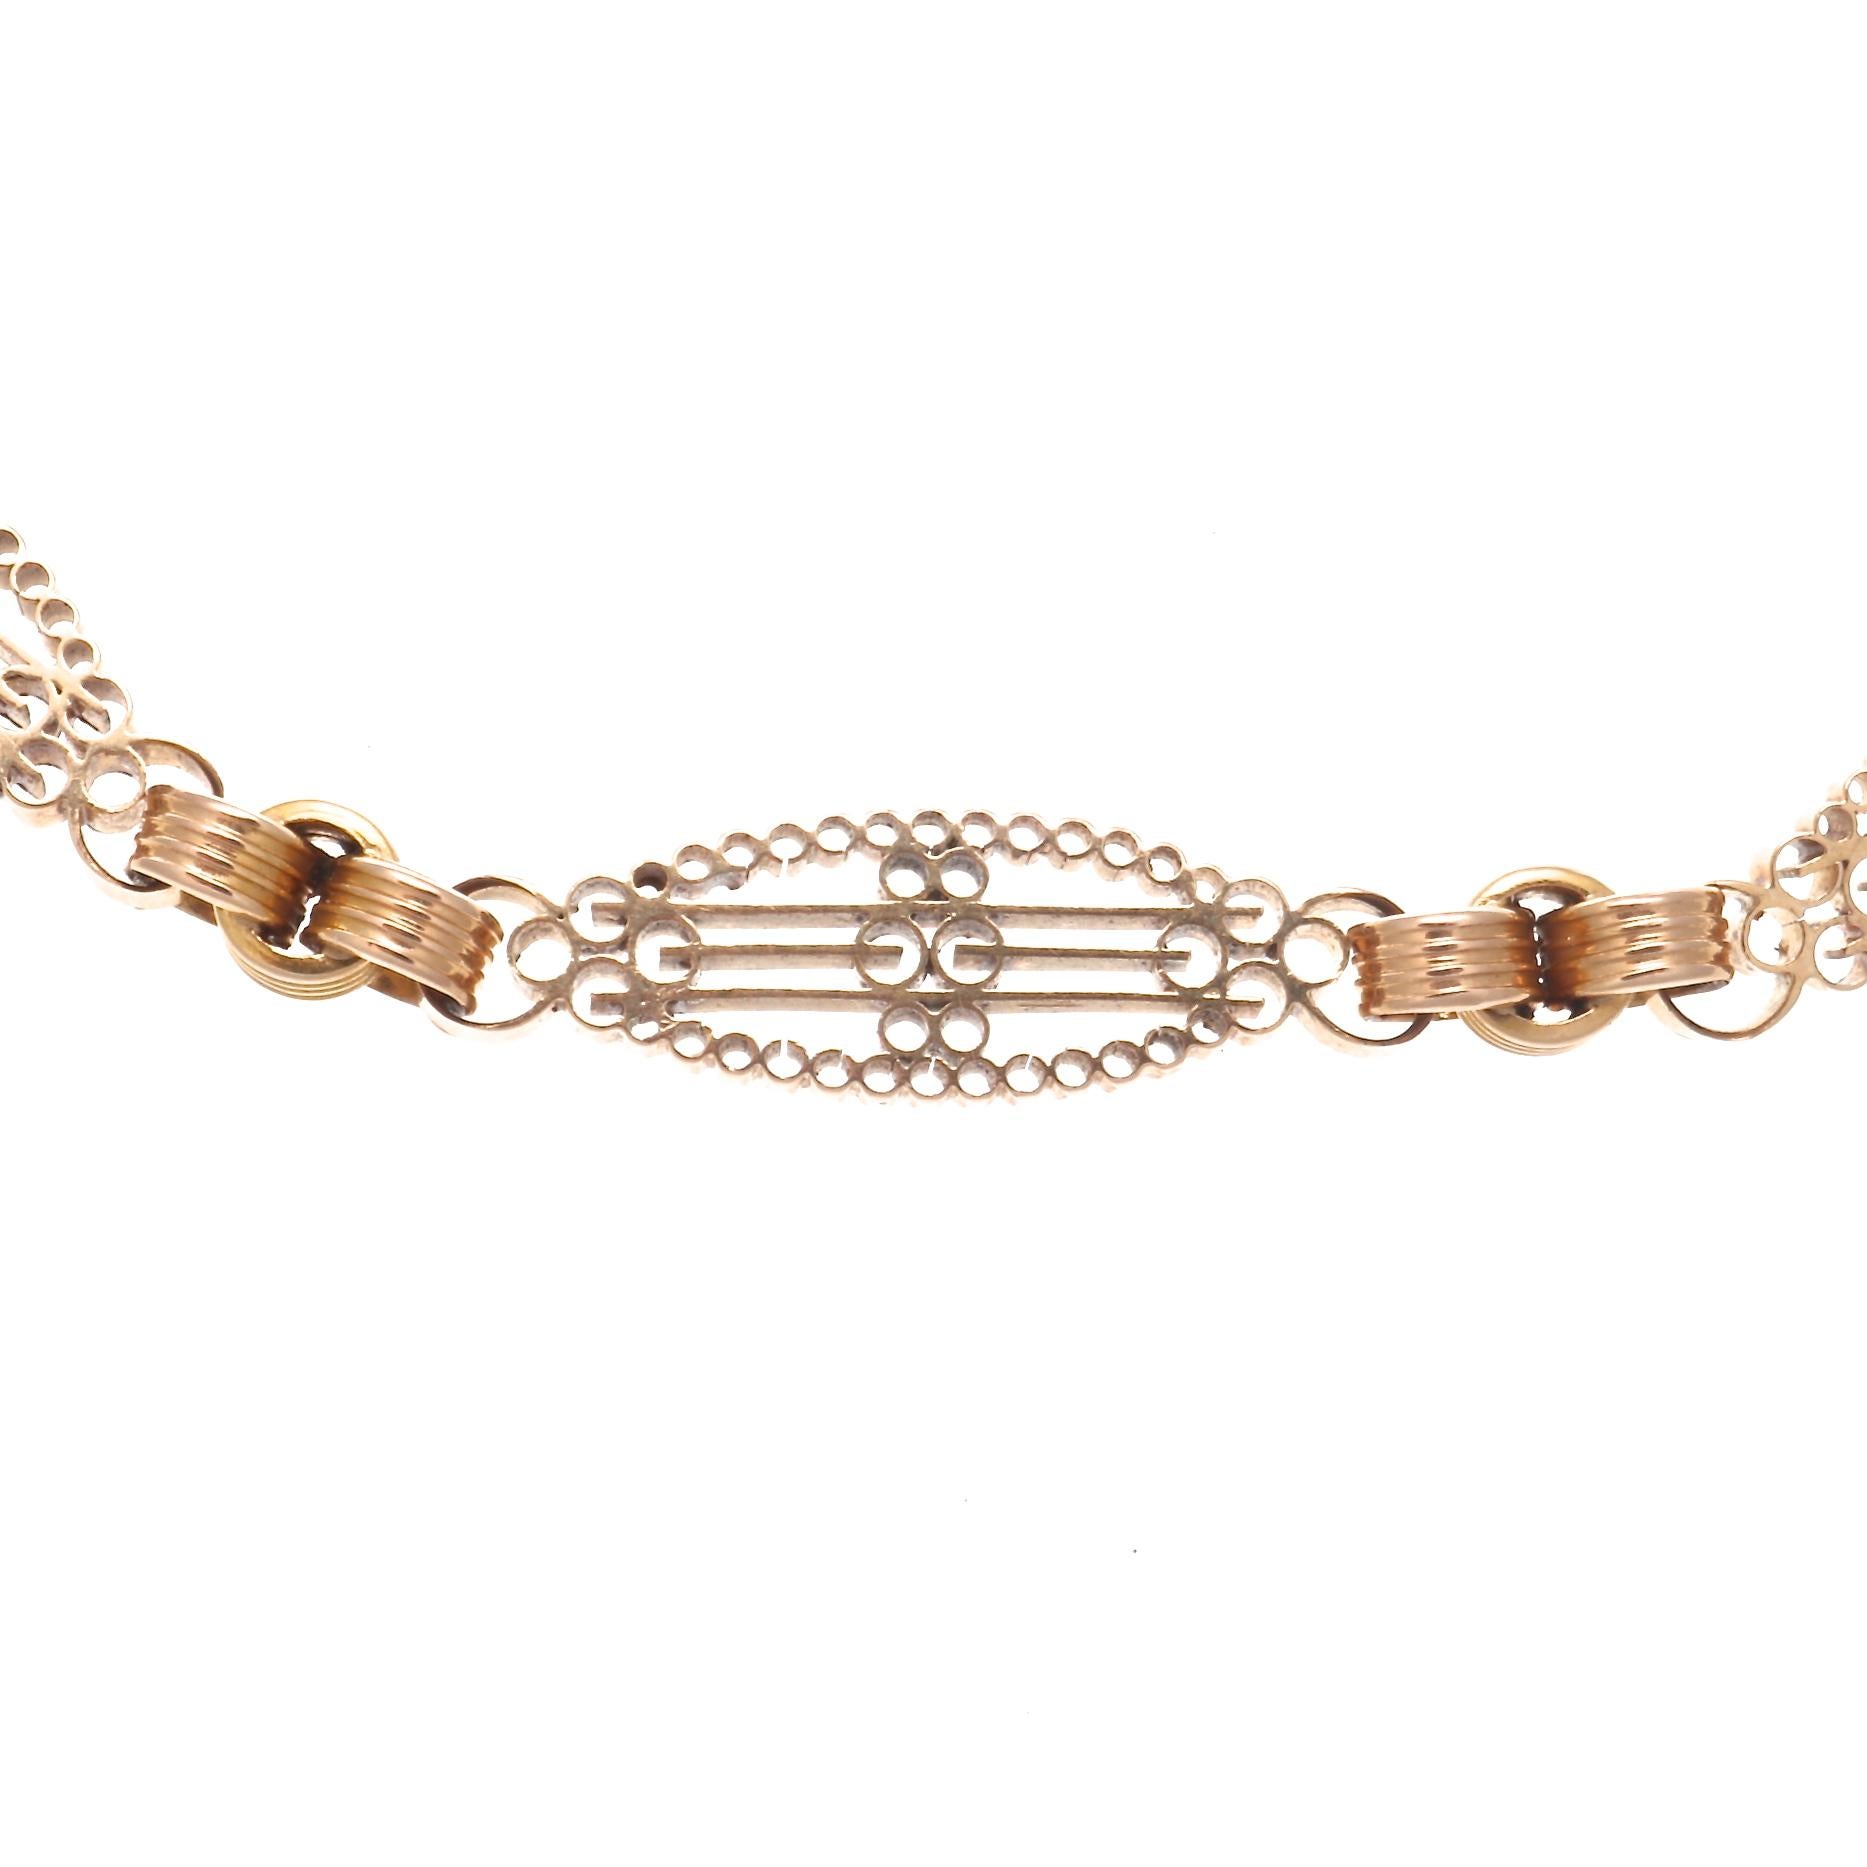 Found on an extensive trip through Southern France, this Antique French 18k rose gold necklace is a one of a kind find. At 17 inches long, it features seven intricately designed oval stations broken up by unique round links. 